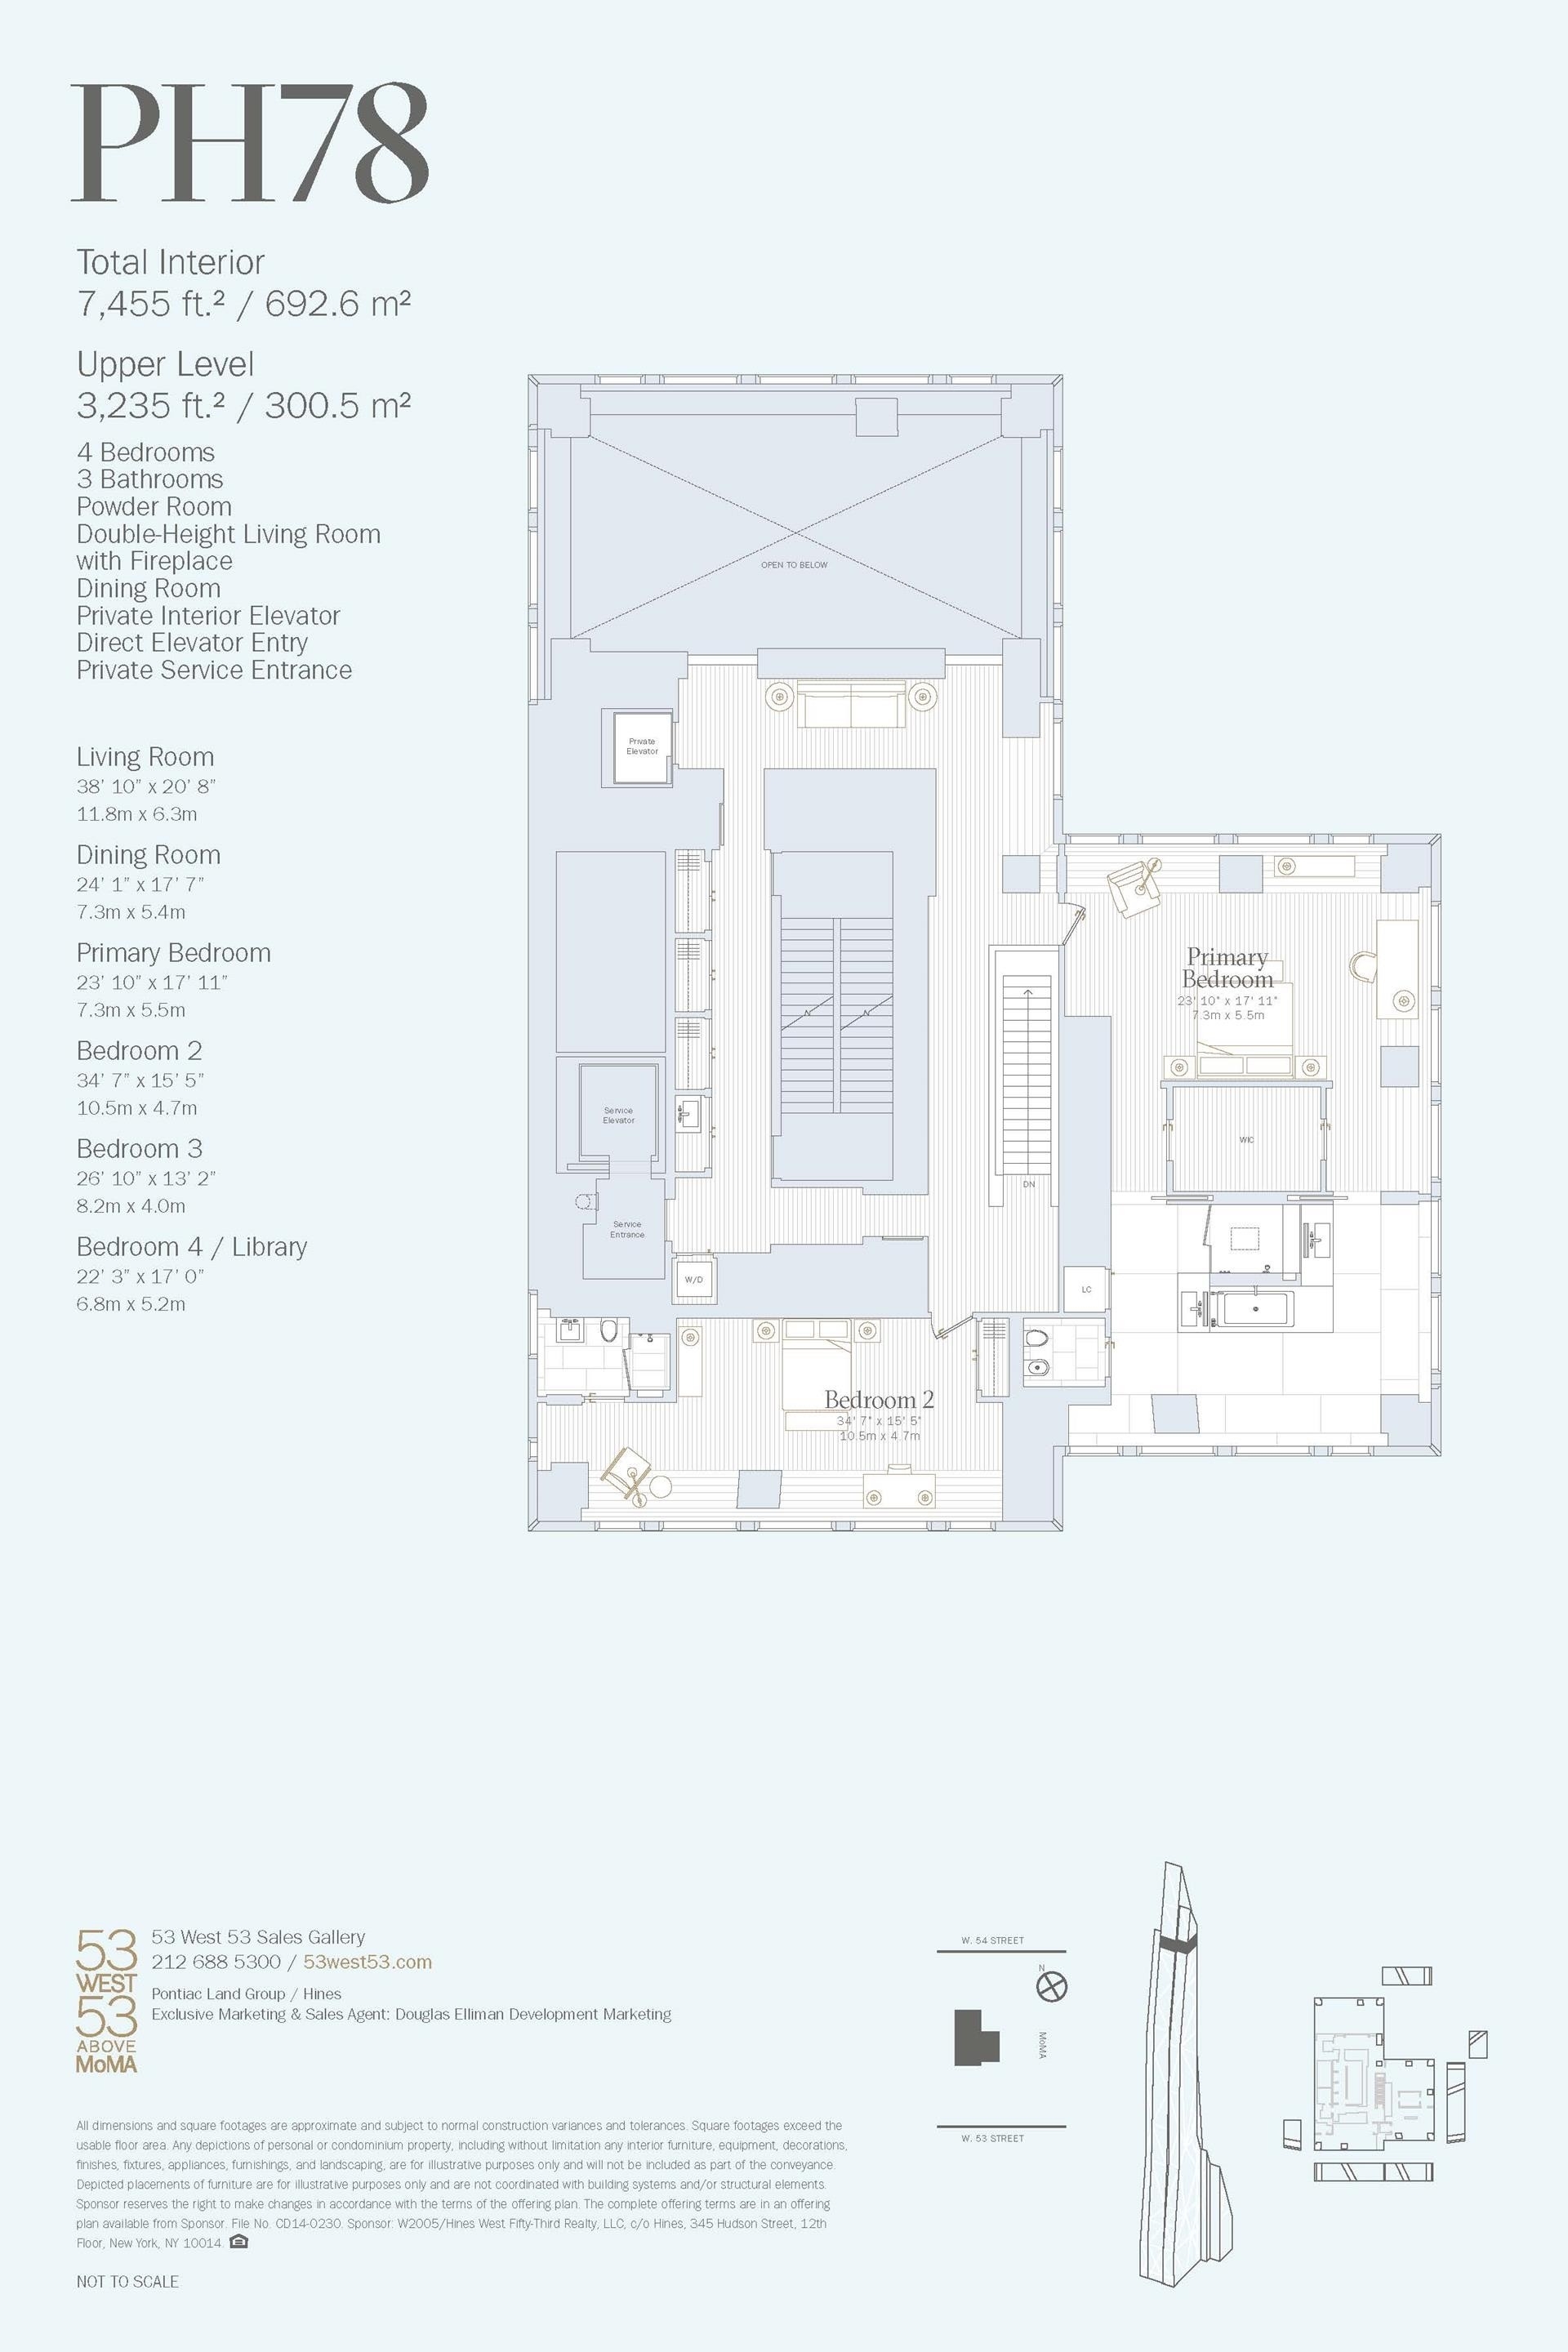 1. Condominiums for Sale at 53W53, 53 53RD ST W, PH78 Midtown West, New York, NY 10019